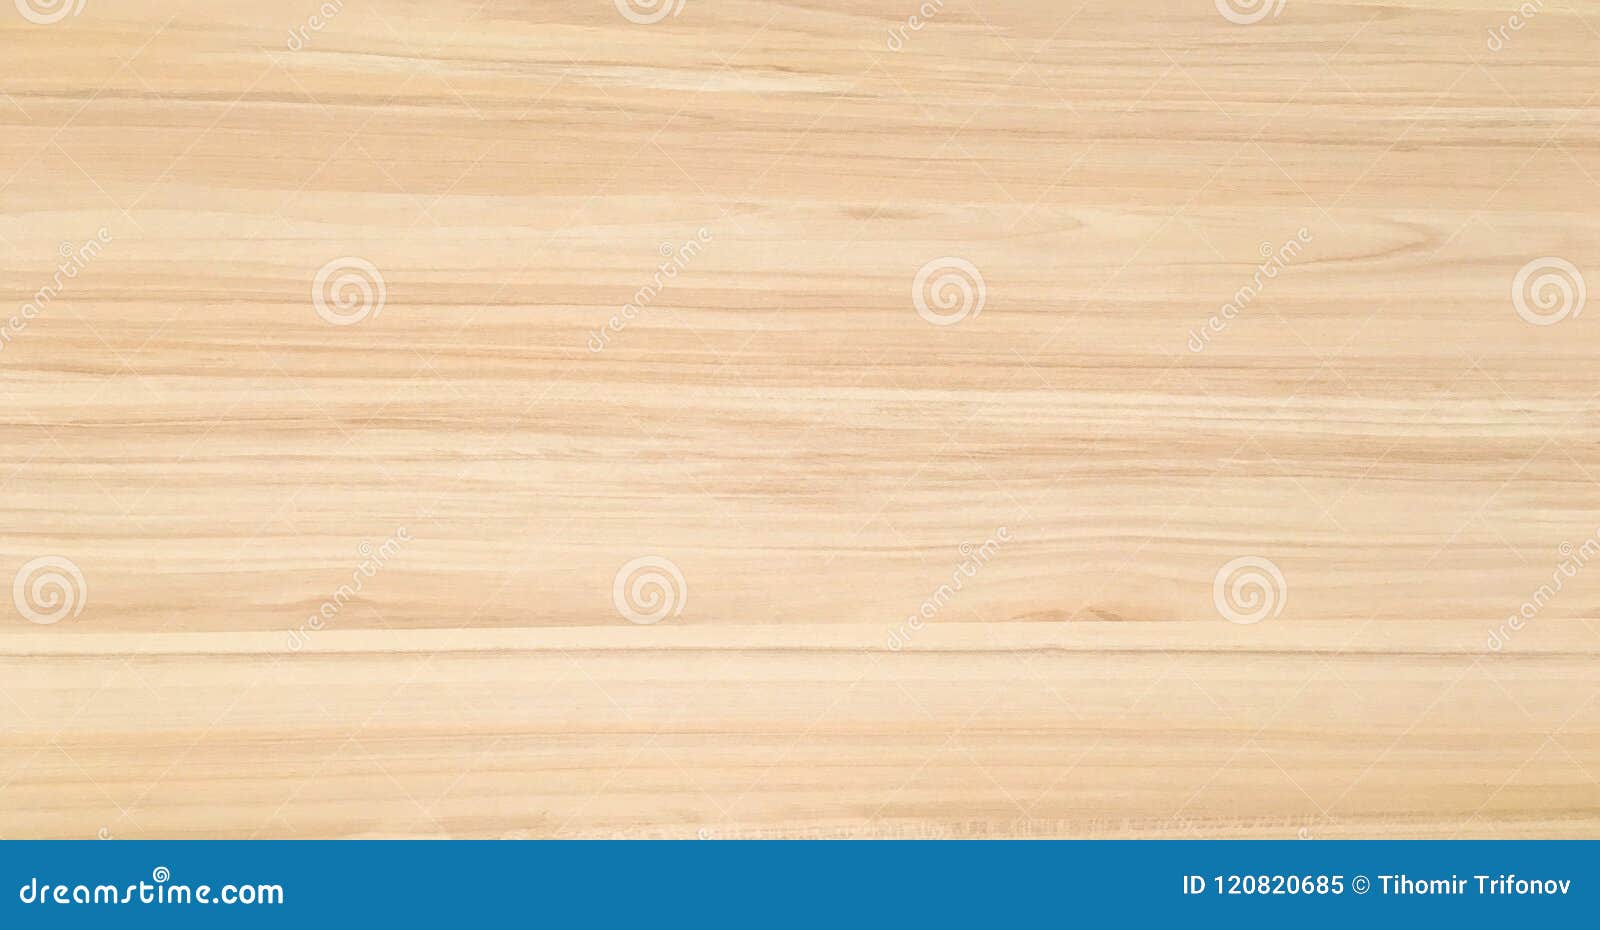 wood texture. surface of light wood background for  and decoration.